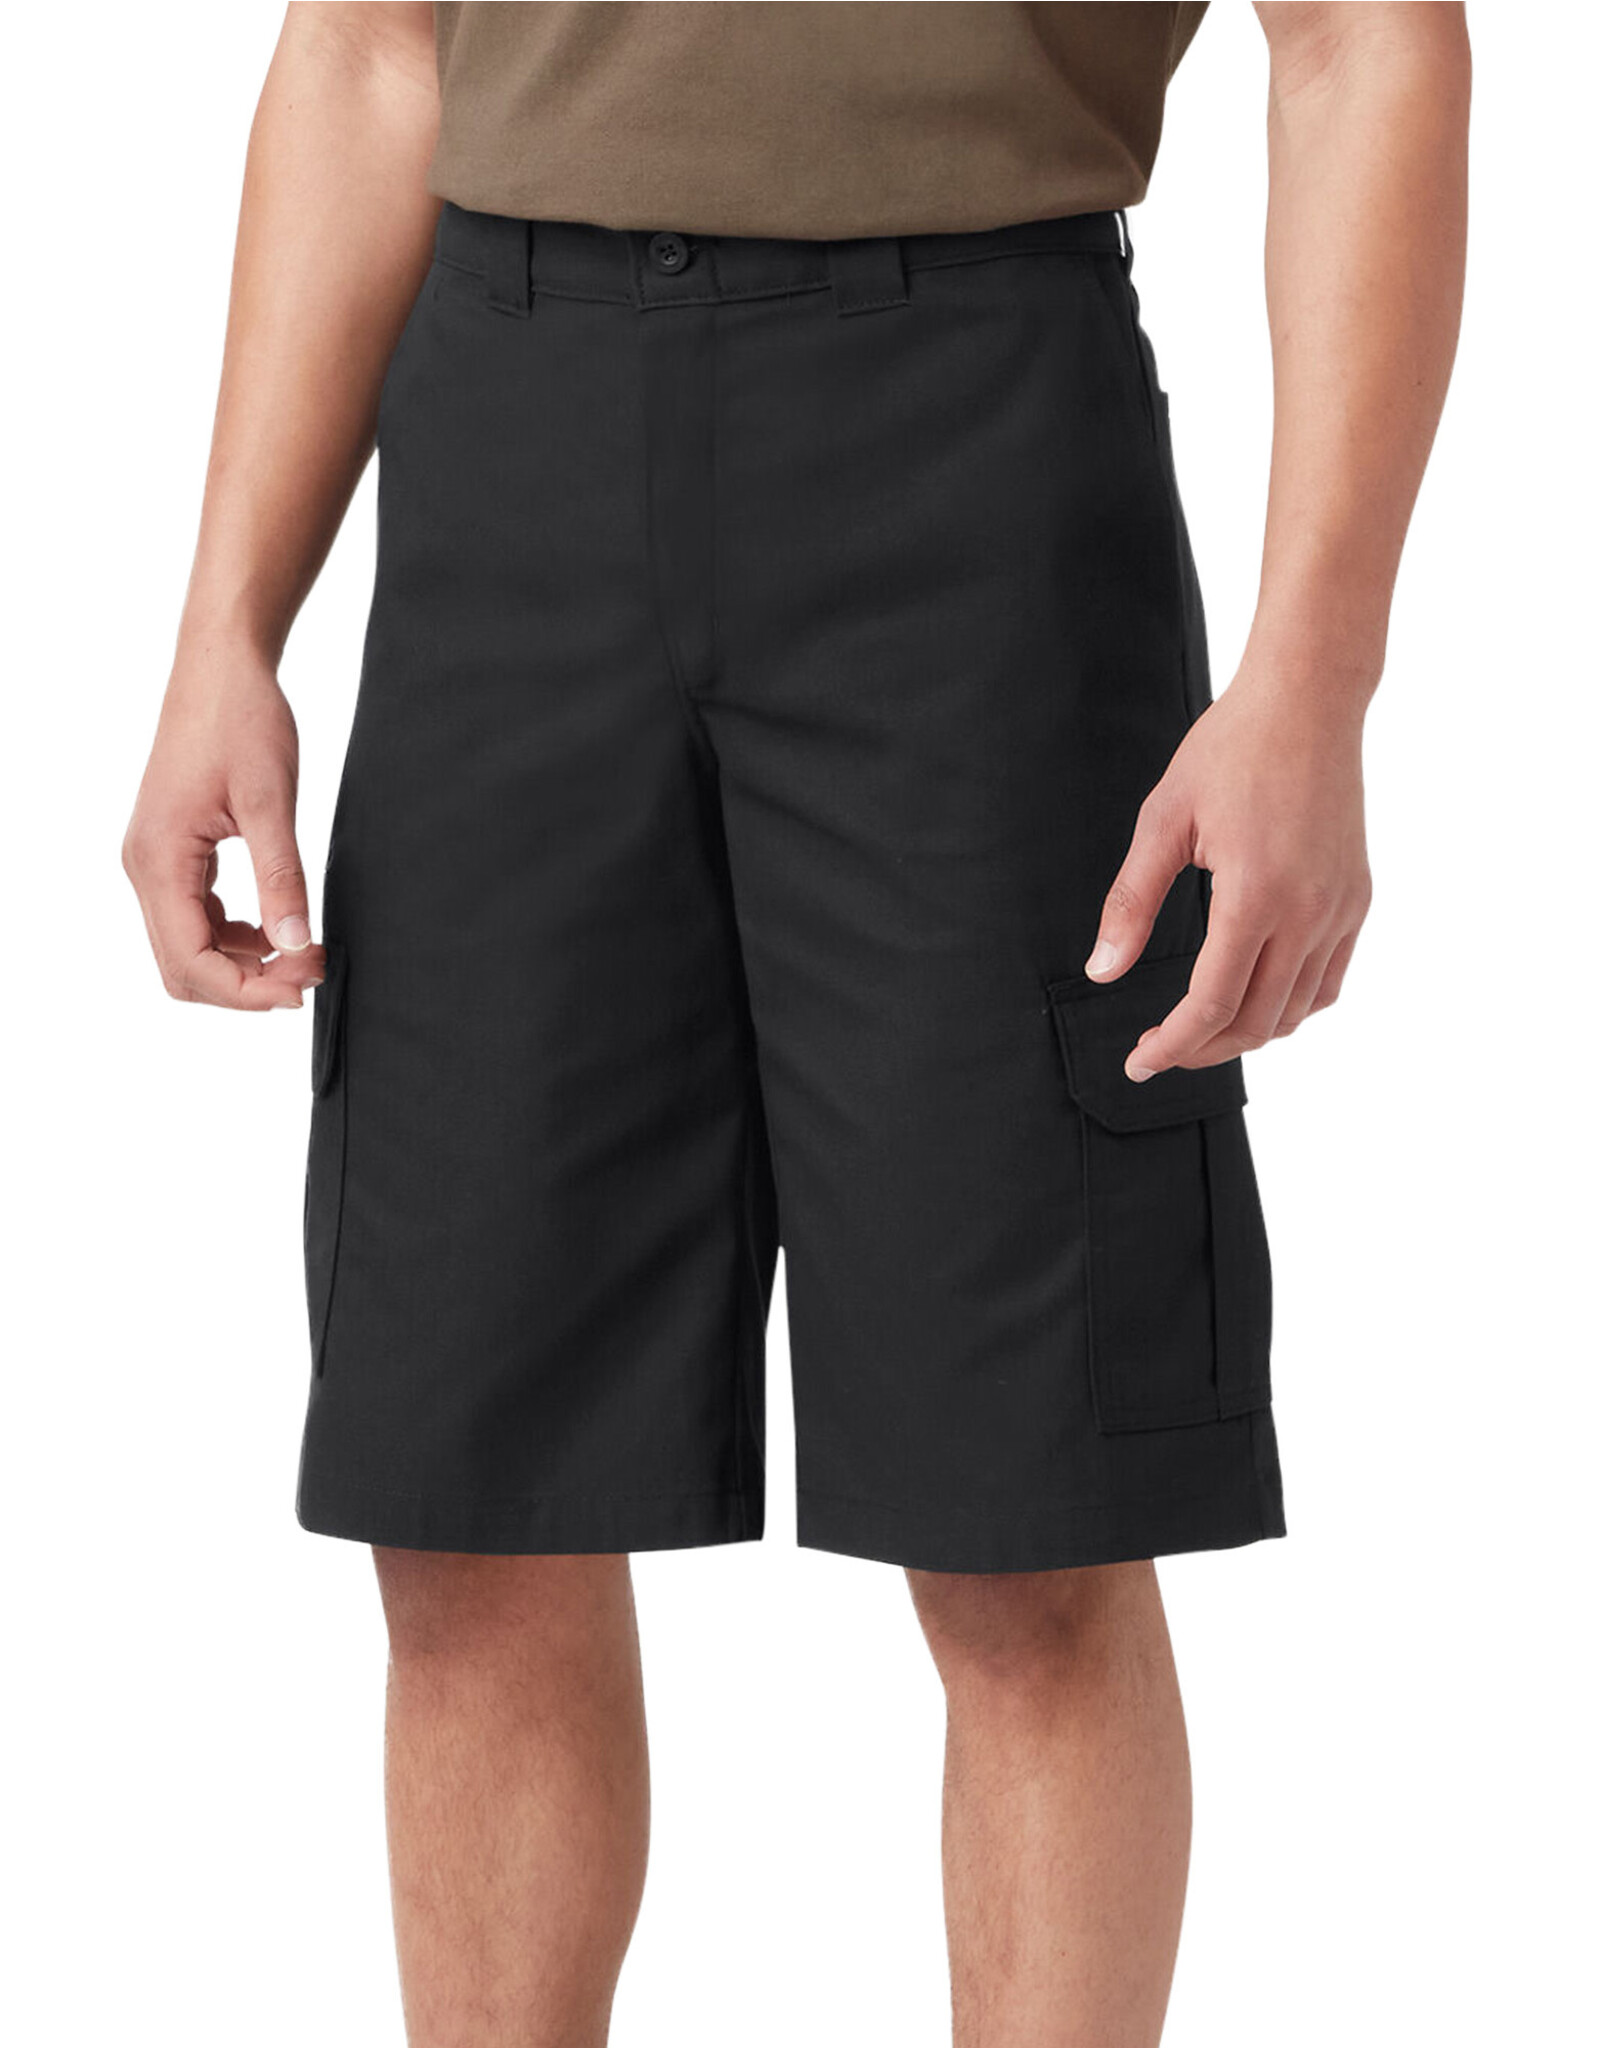 DICKIES 13" Relaxed Fit Twill Cargo Work Short Black - WR557BK